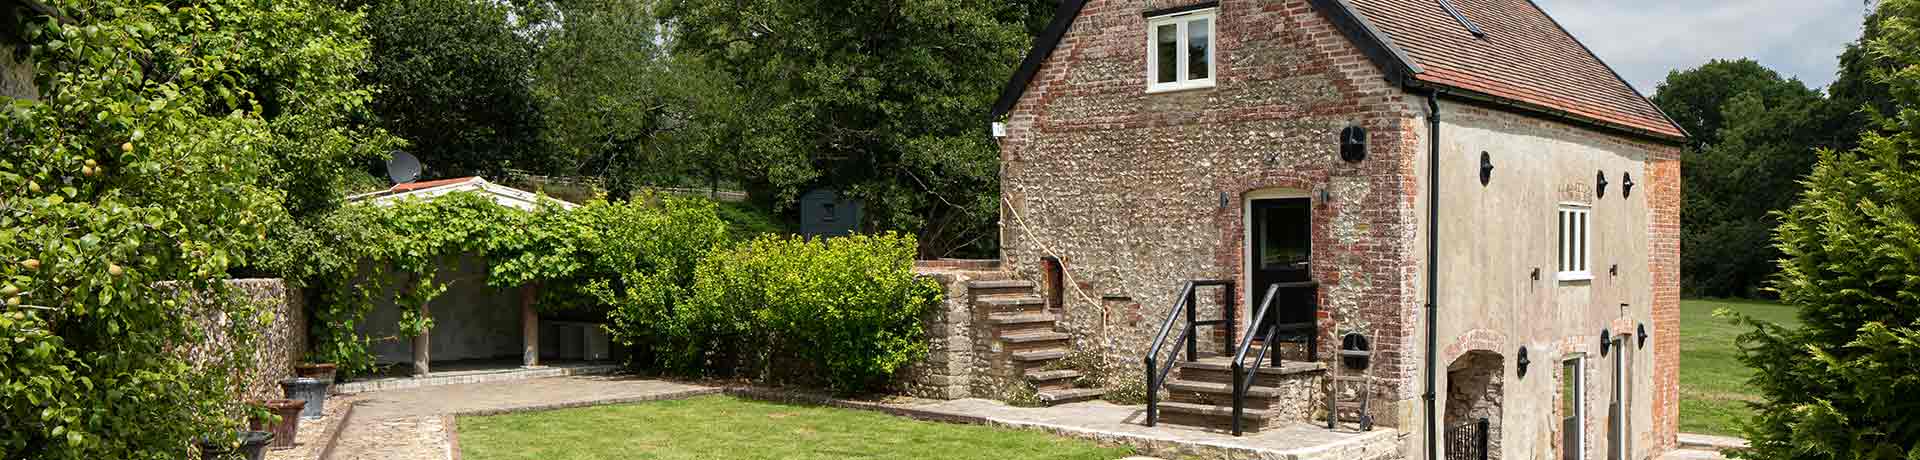 Cottages for 4 people in Central England